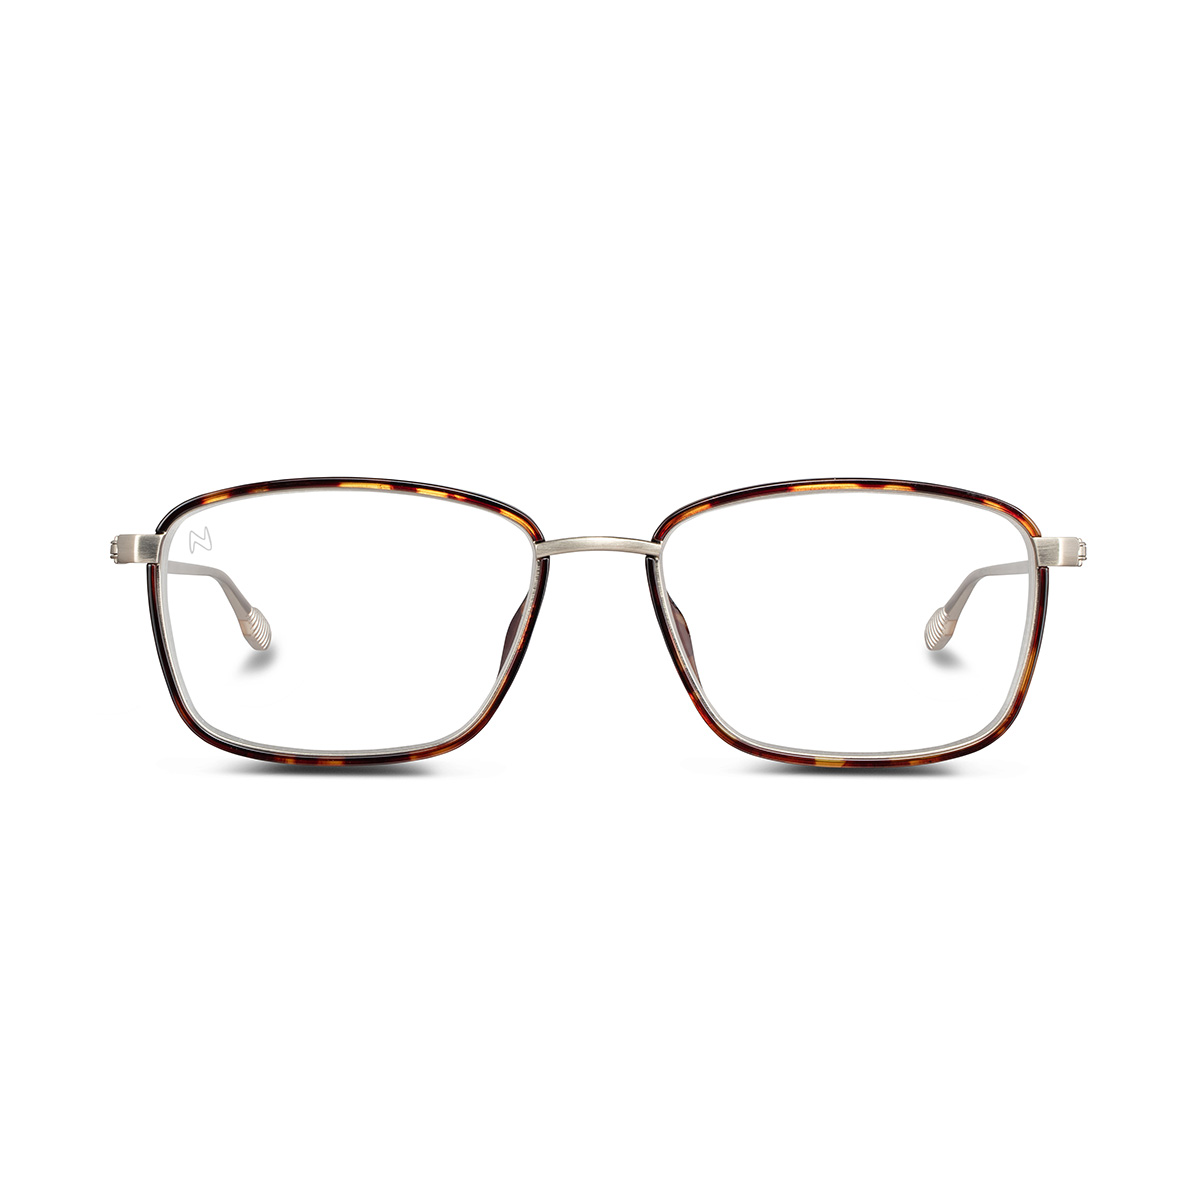 Reading glasses without branches Dual Faro Tortoise de Face